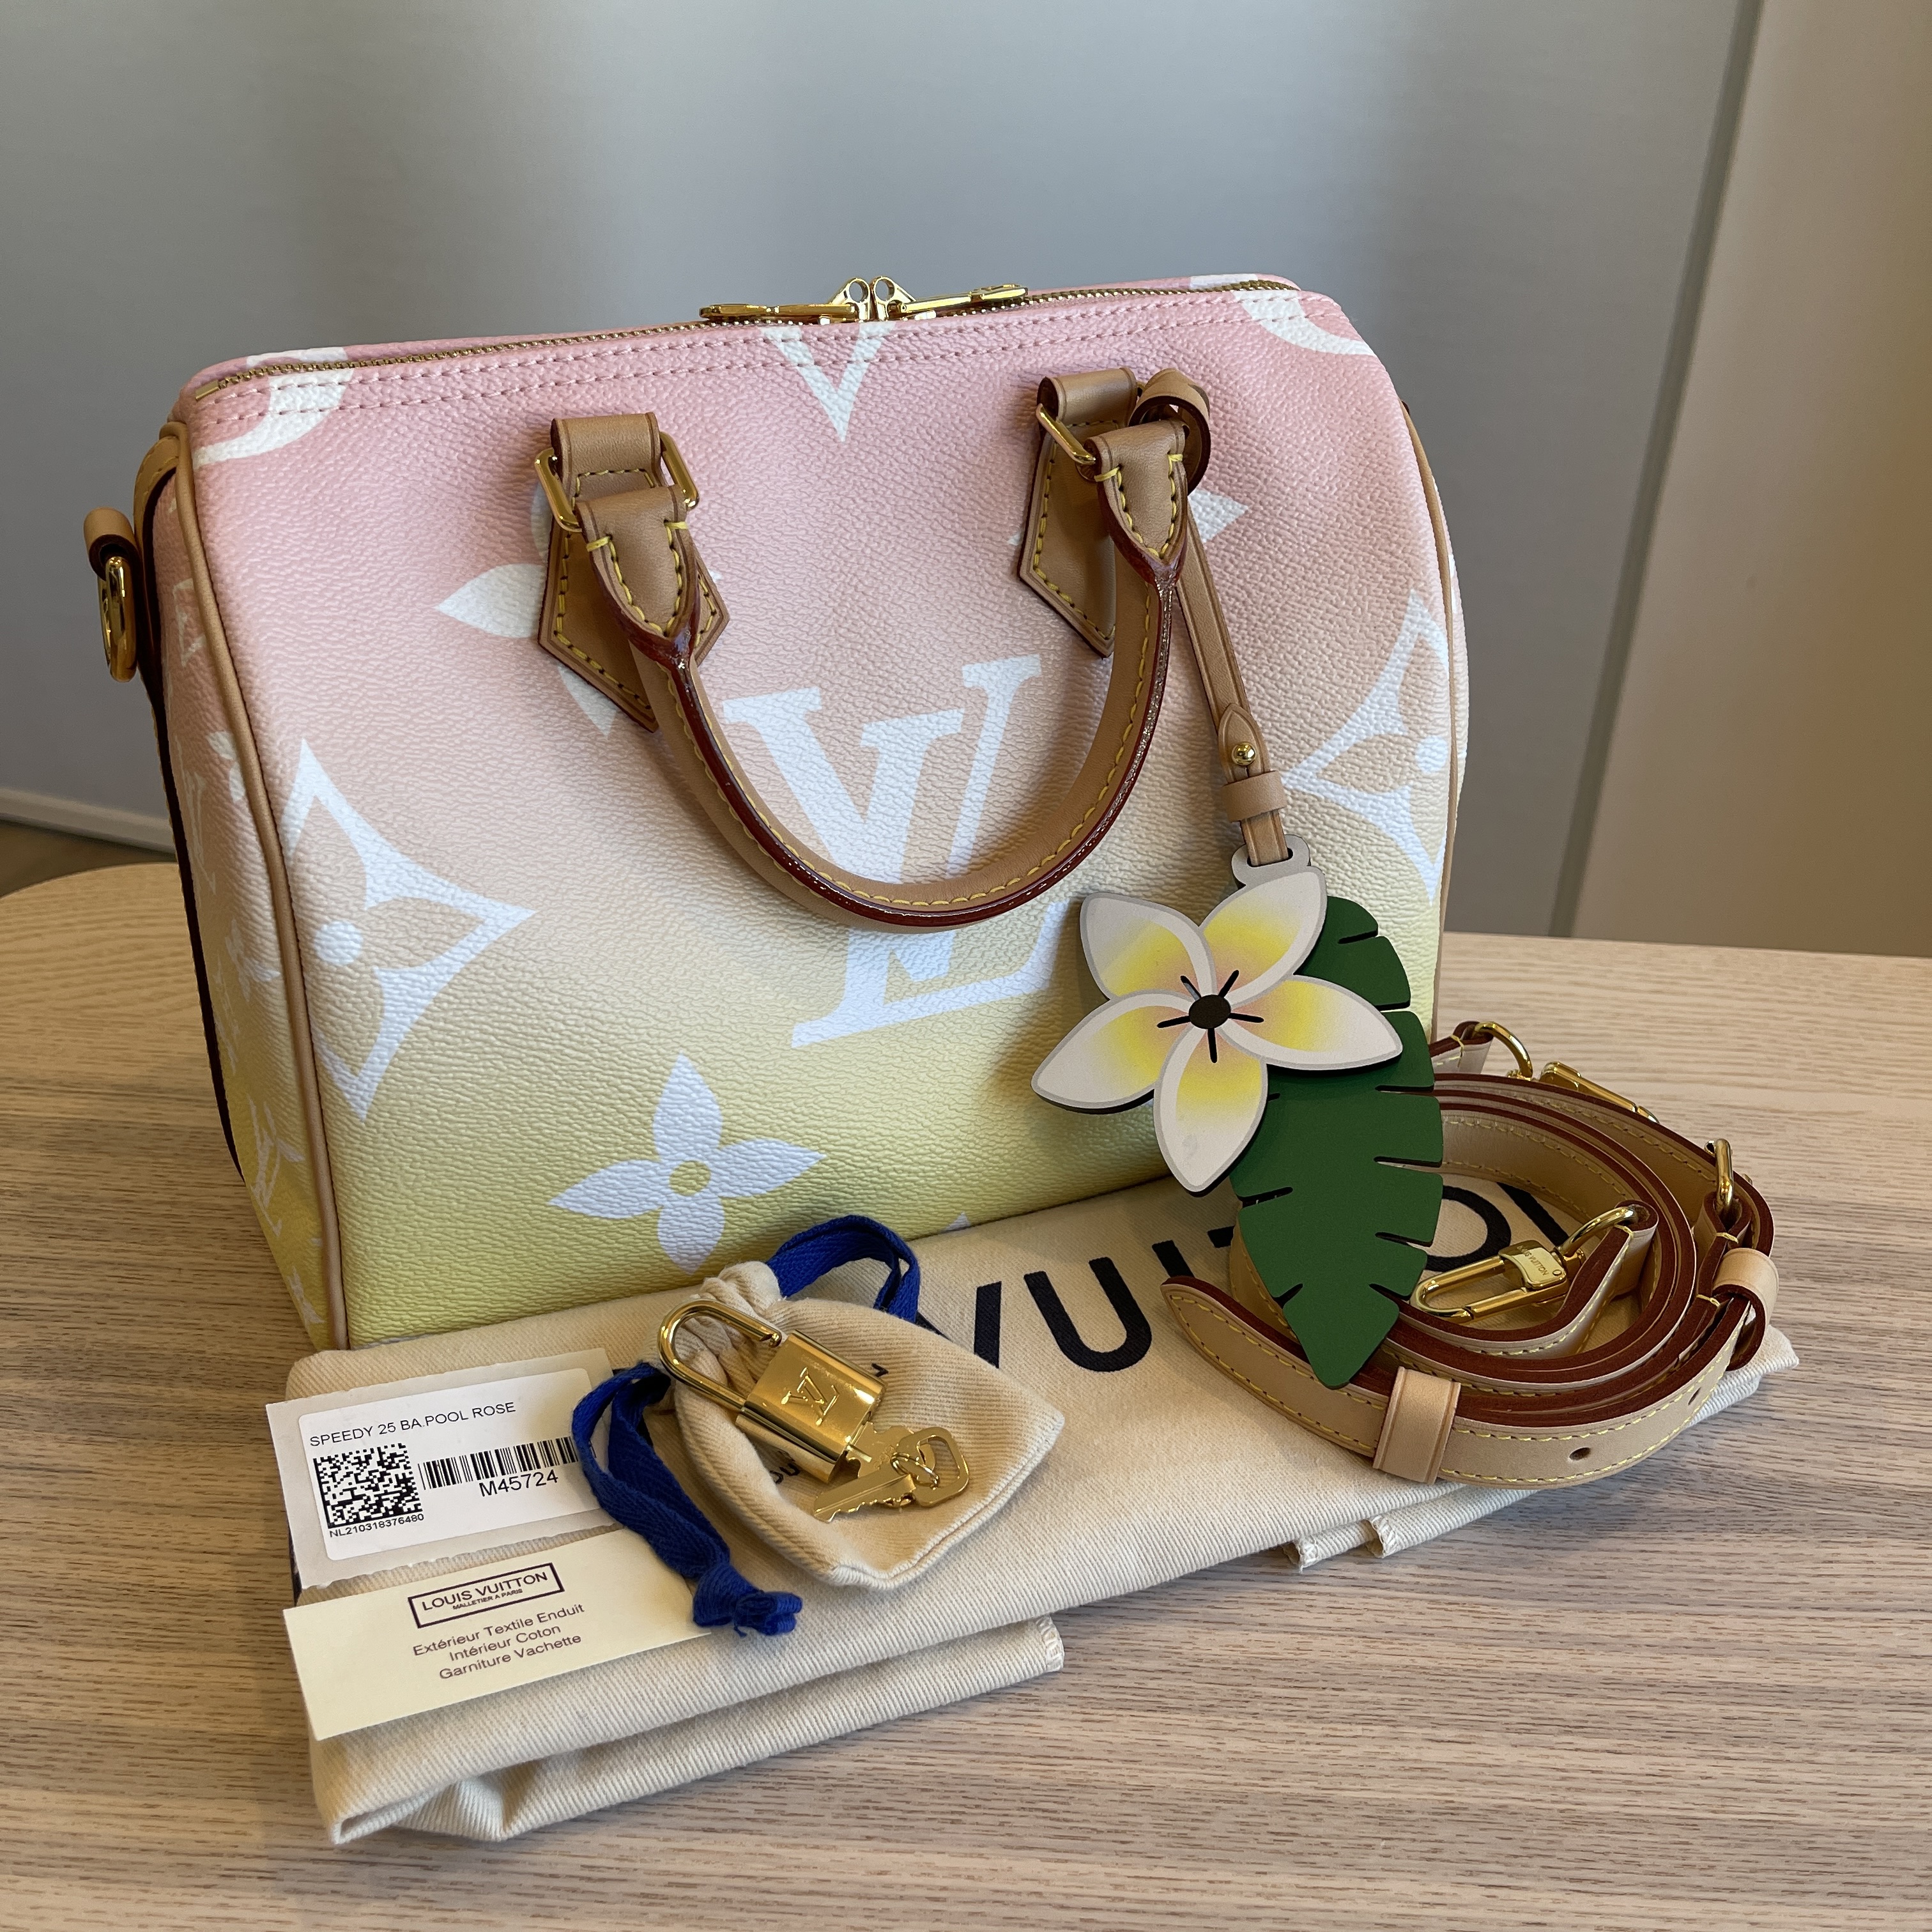 Review My Lux] Louis Vuitton Pool collection Speedy 25 pink 2021